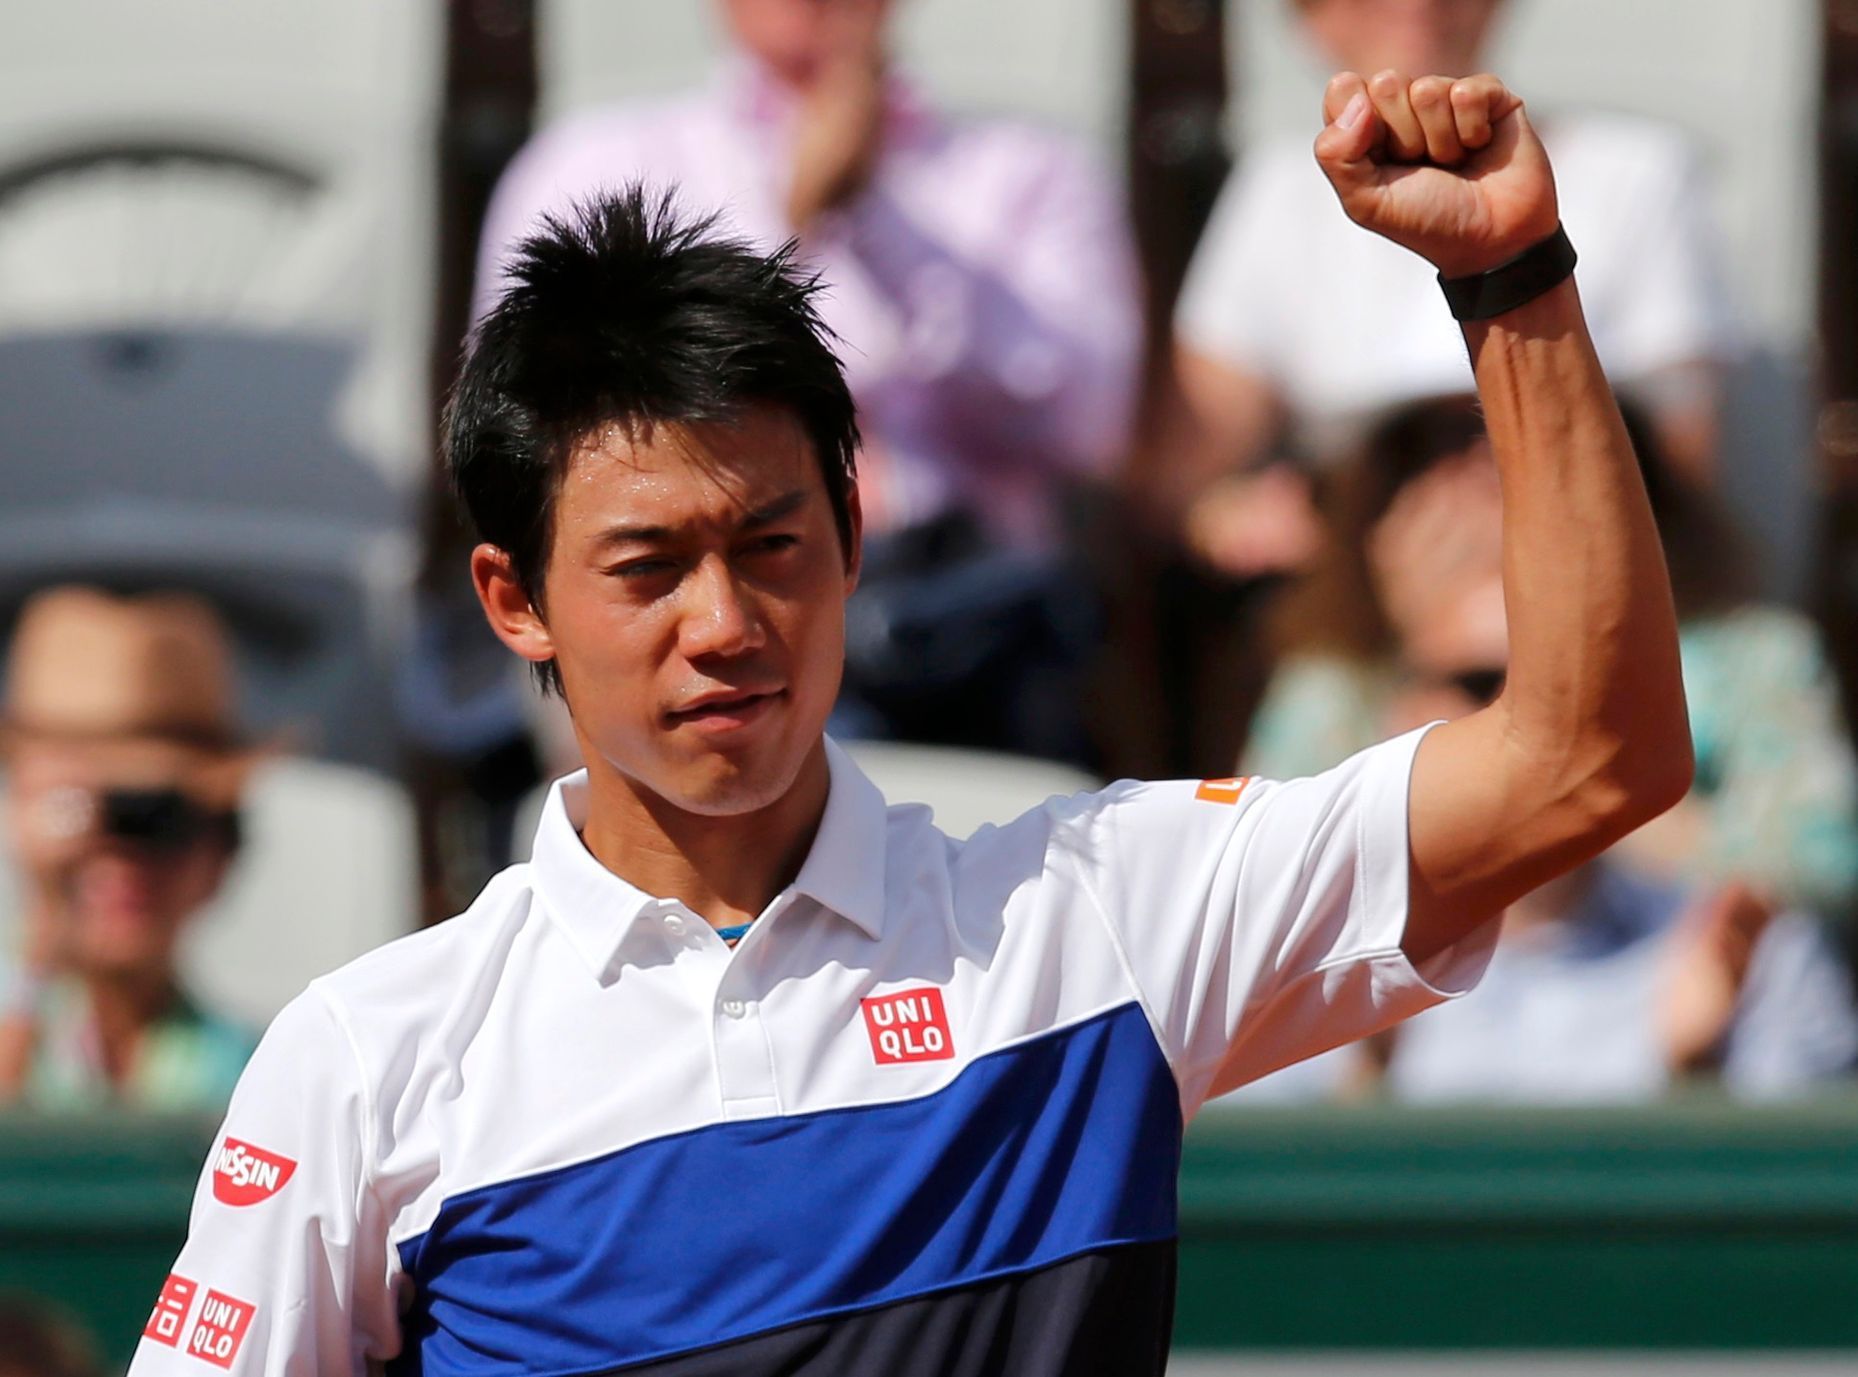 Kei Nishikori of Japan celebrates after defeating Paul-Henri Mathieu of France during their men's singles match at the French Open tennis tournament at the Roland Garros stadium in Paris